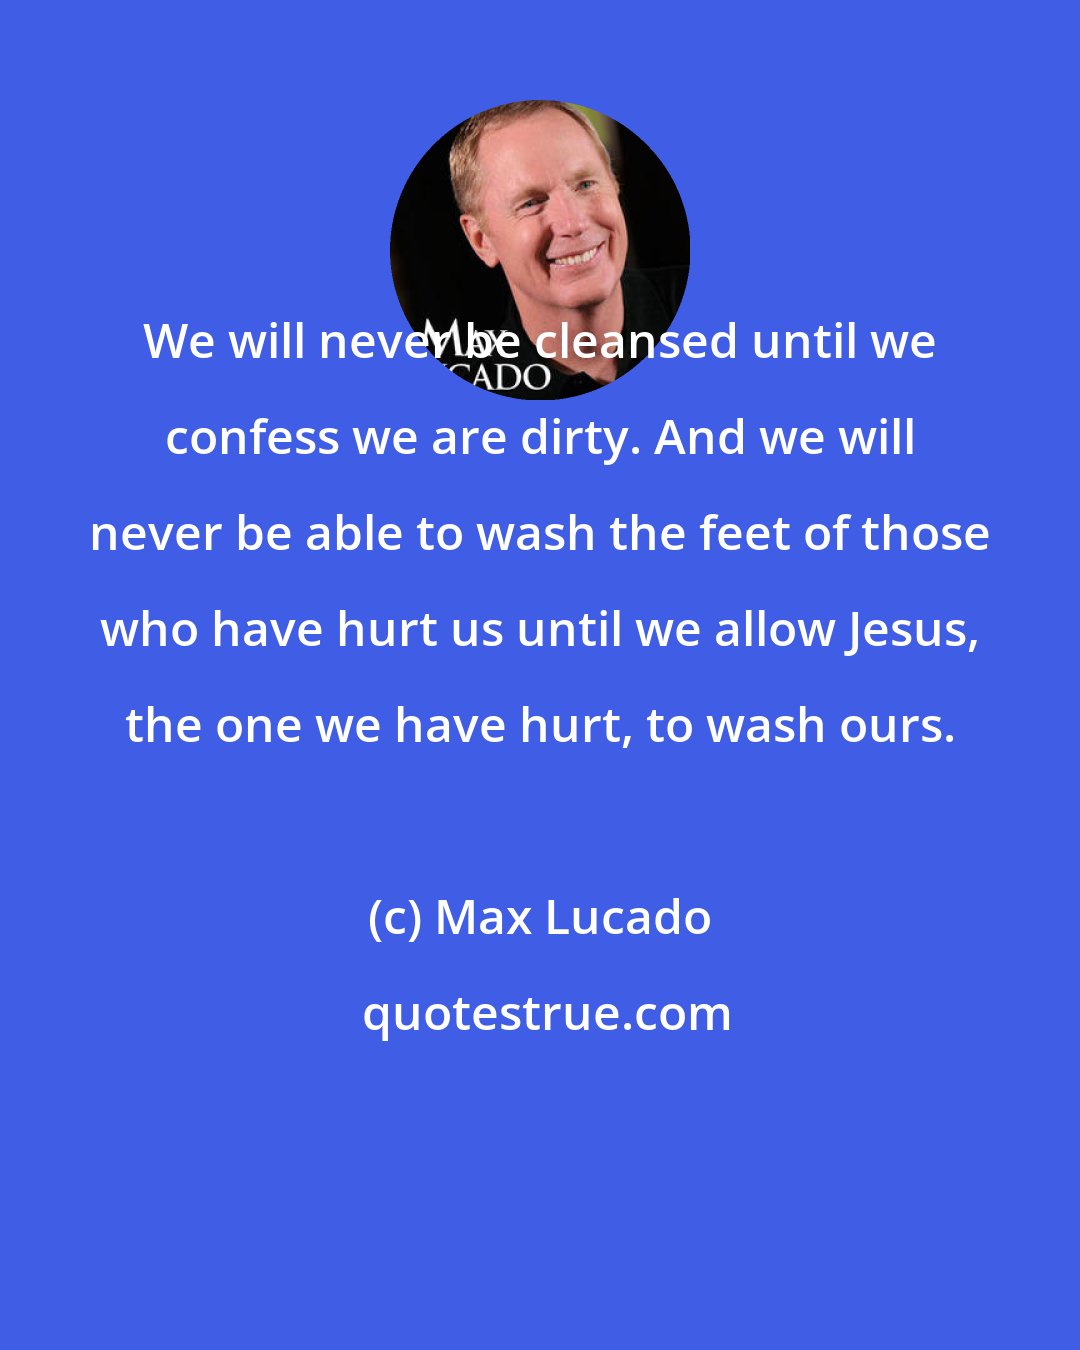 Max Lucado: We will never be cleansed until we confess we are dirty. And we will never be able to wash the feet of those who have hurt us until we allow Jesus, the one we have hurt, to wash ours.